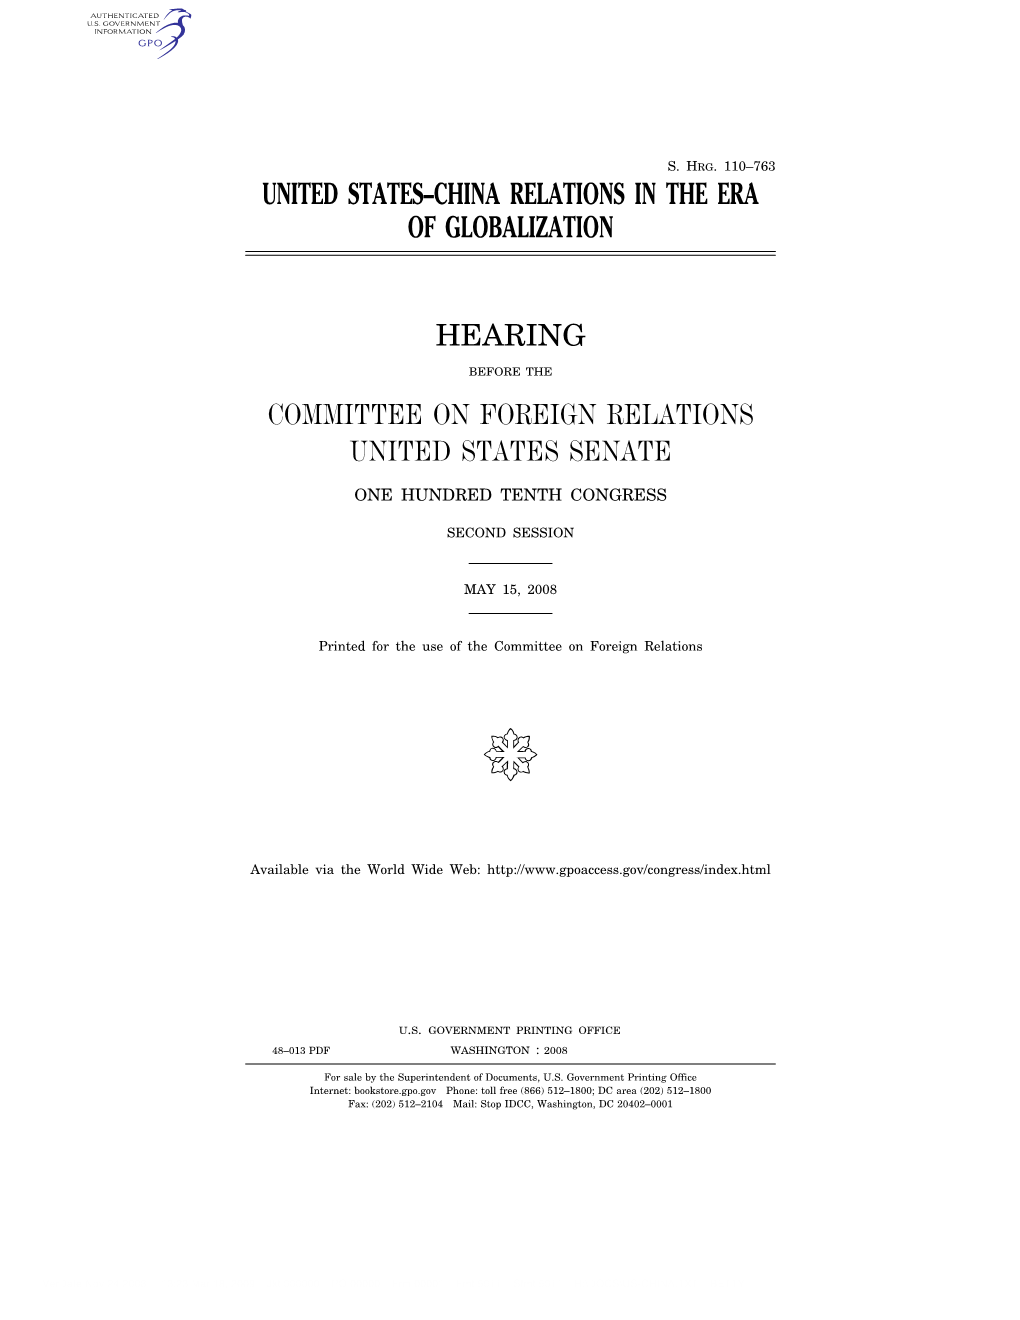 United States–China Relations in the Era of Globalization Hearing Committee on Foreign Relations United States Senate